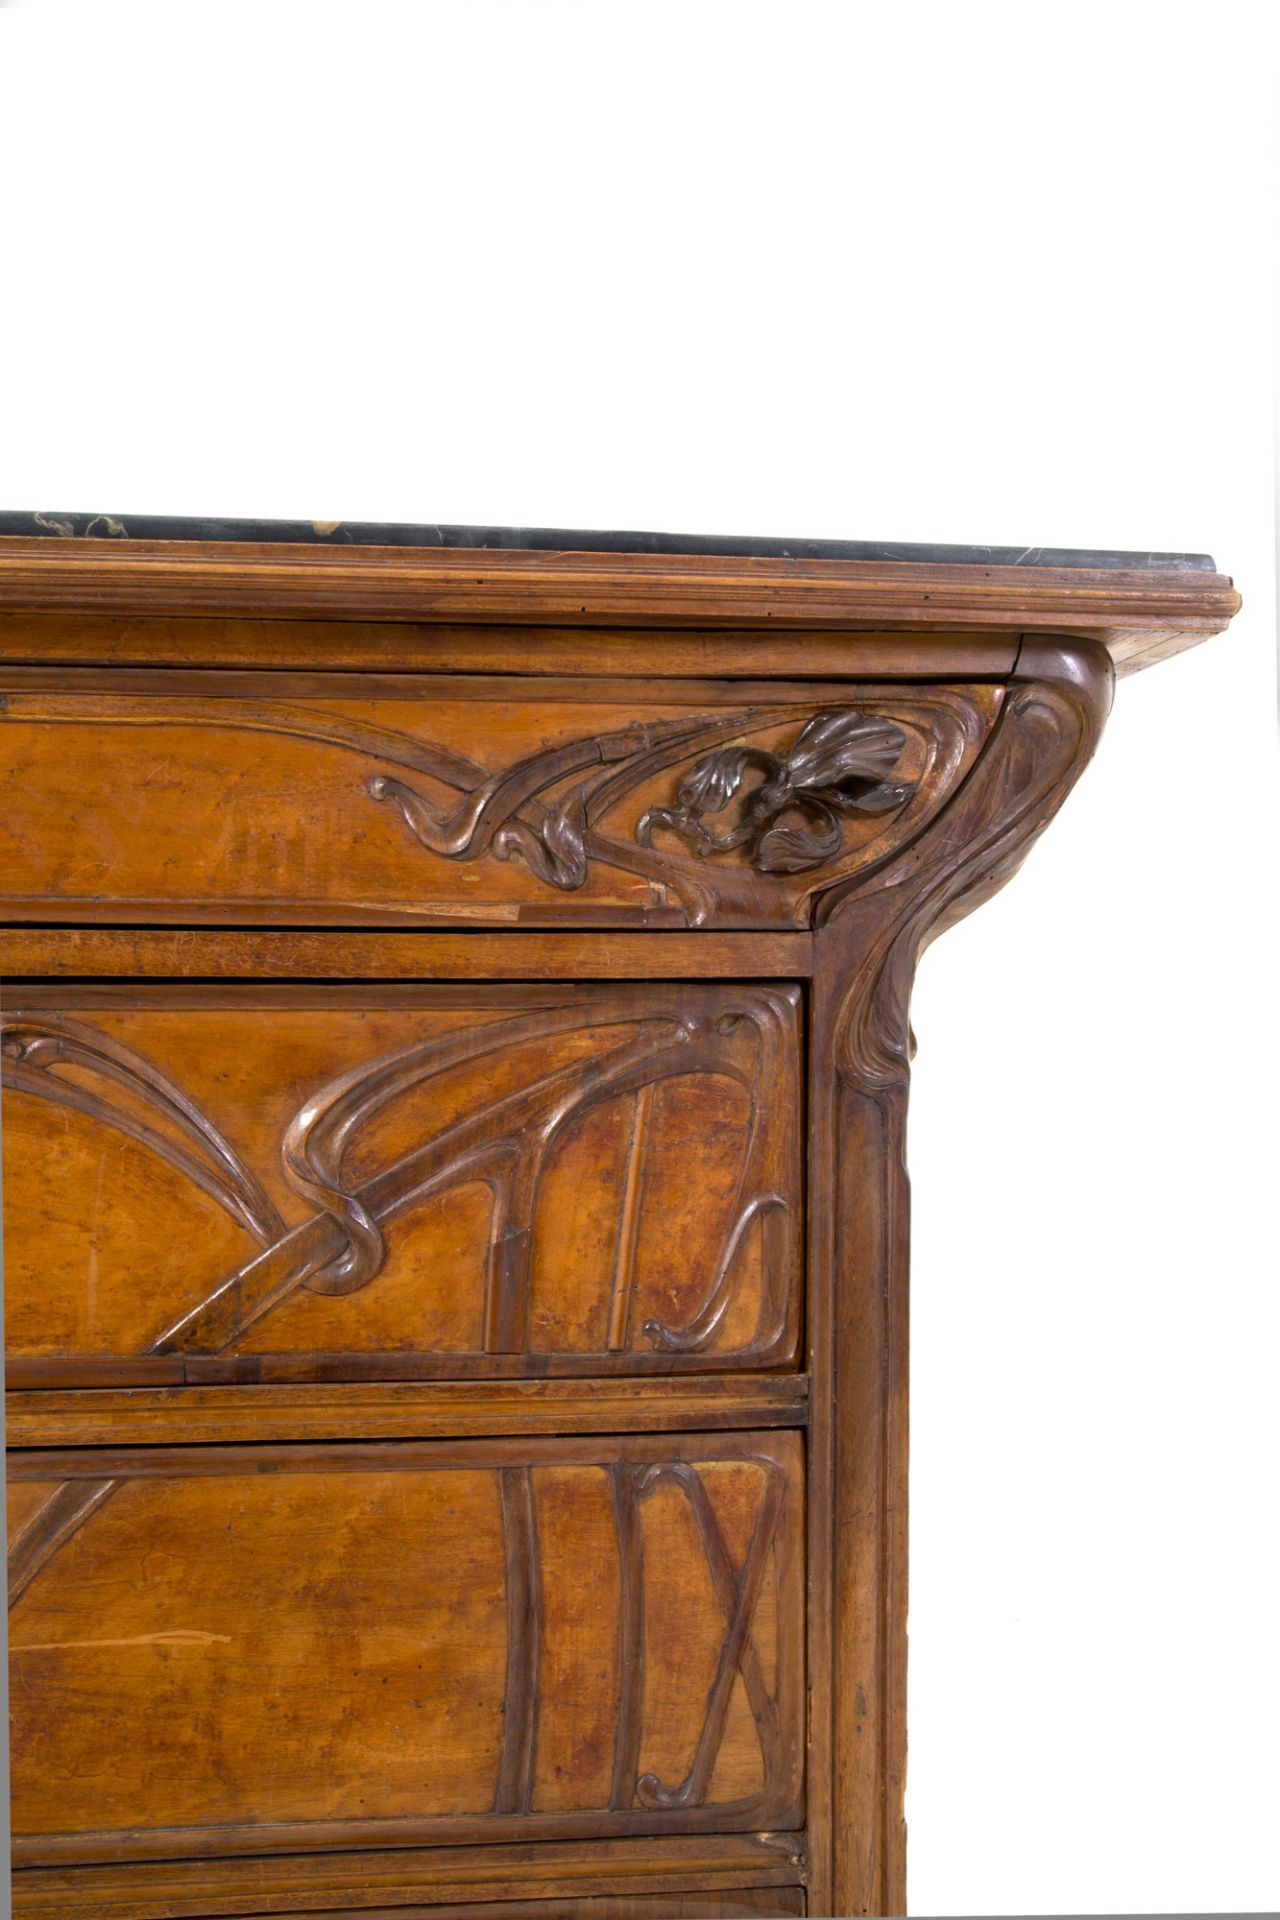 Dresser with marble top - Image 5 of 8